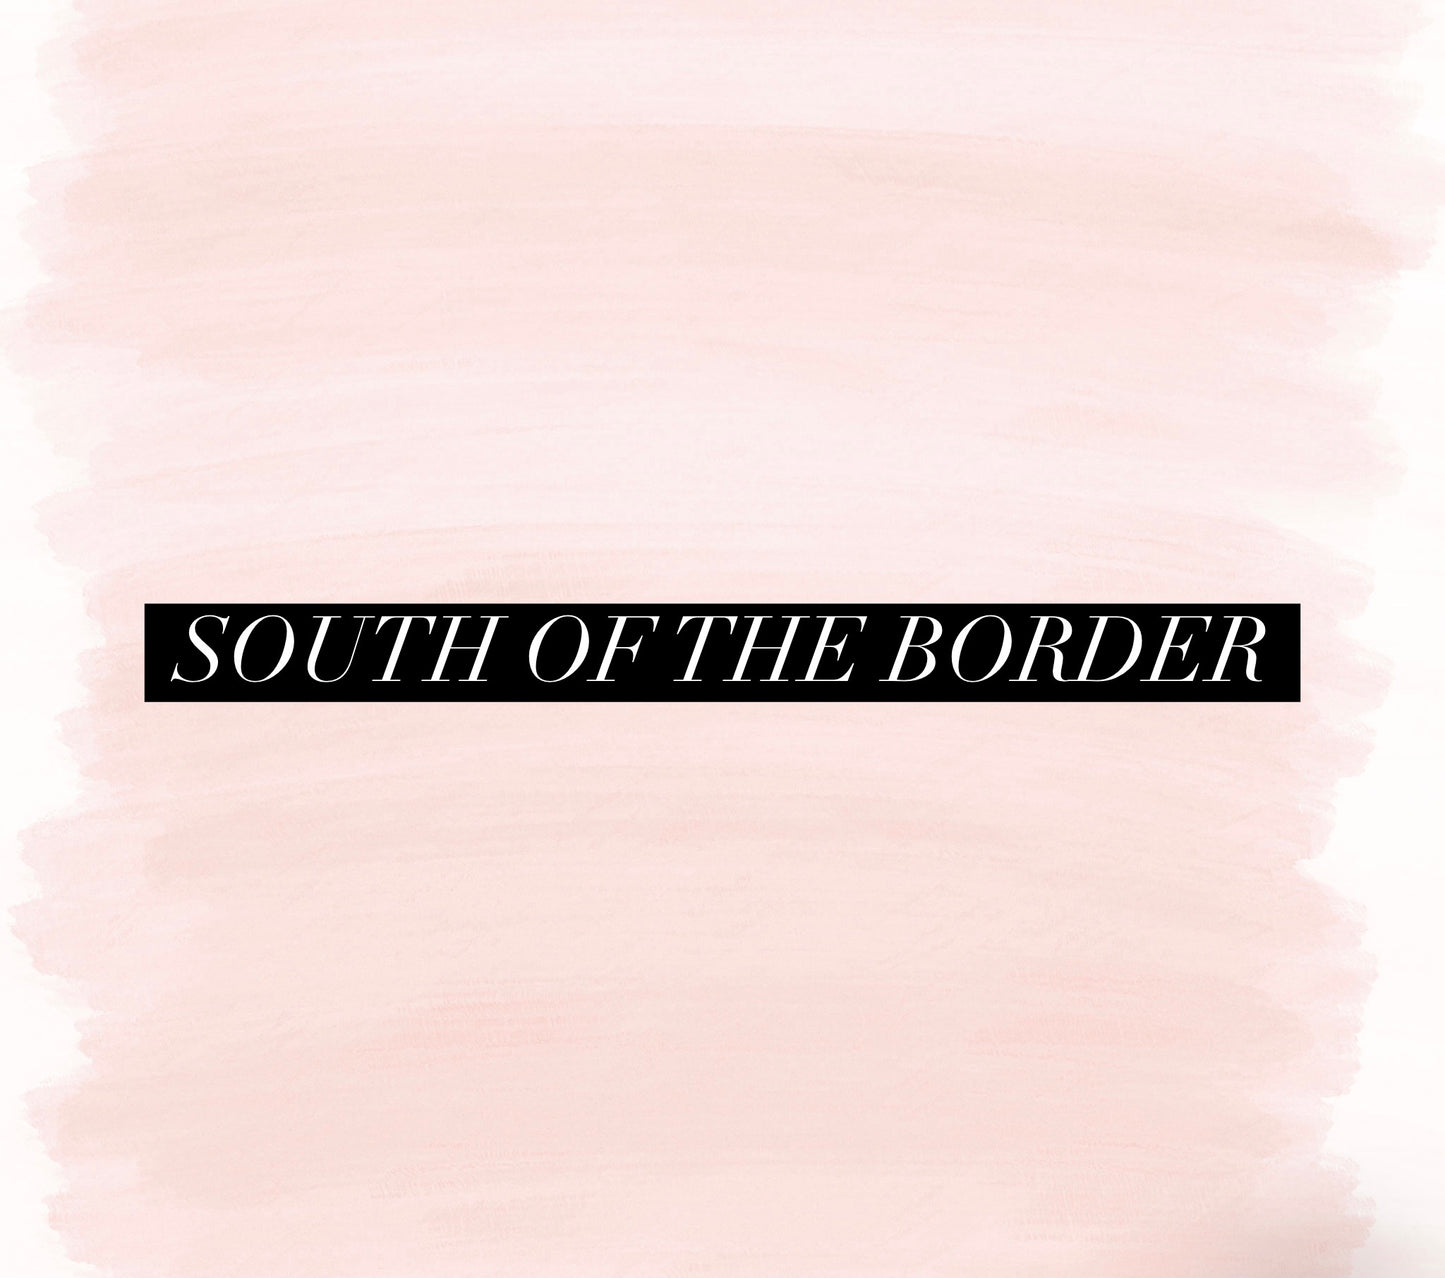 South of the Border (Special Order)